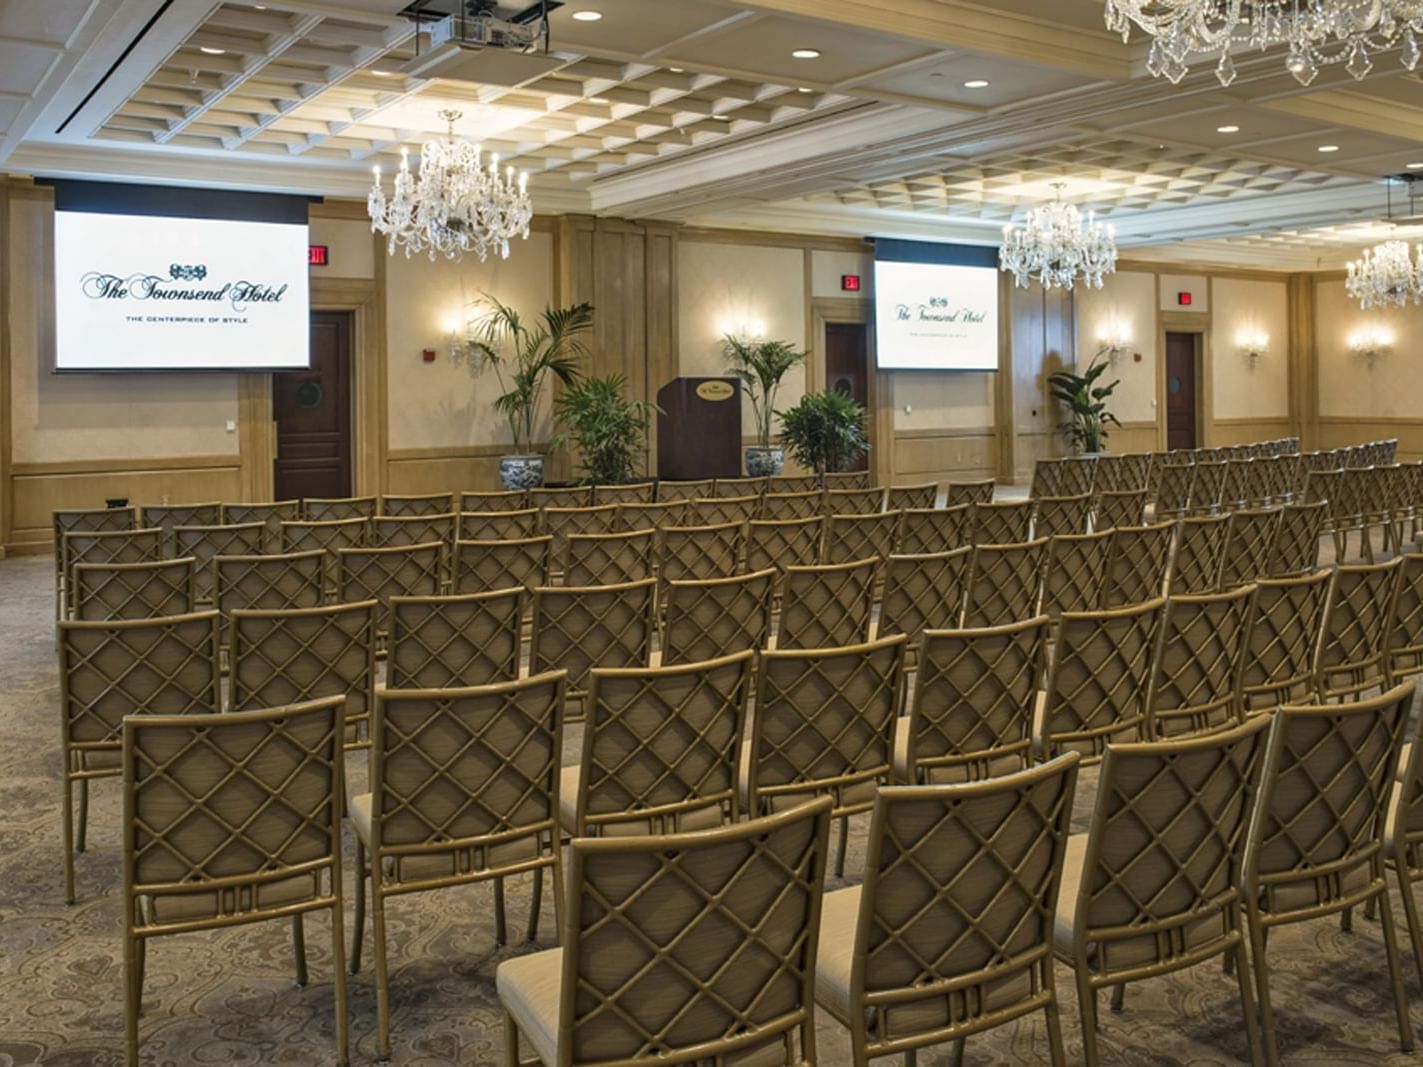 Theatre-style chair layout in Salon II & III at Townsend Hotel